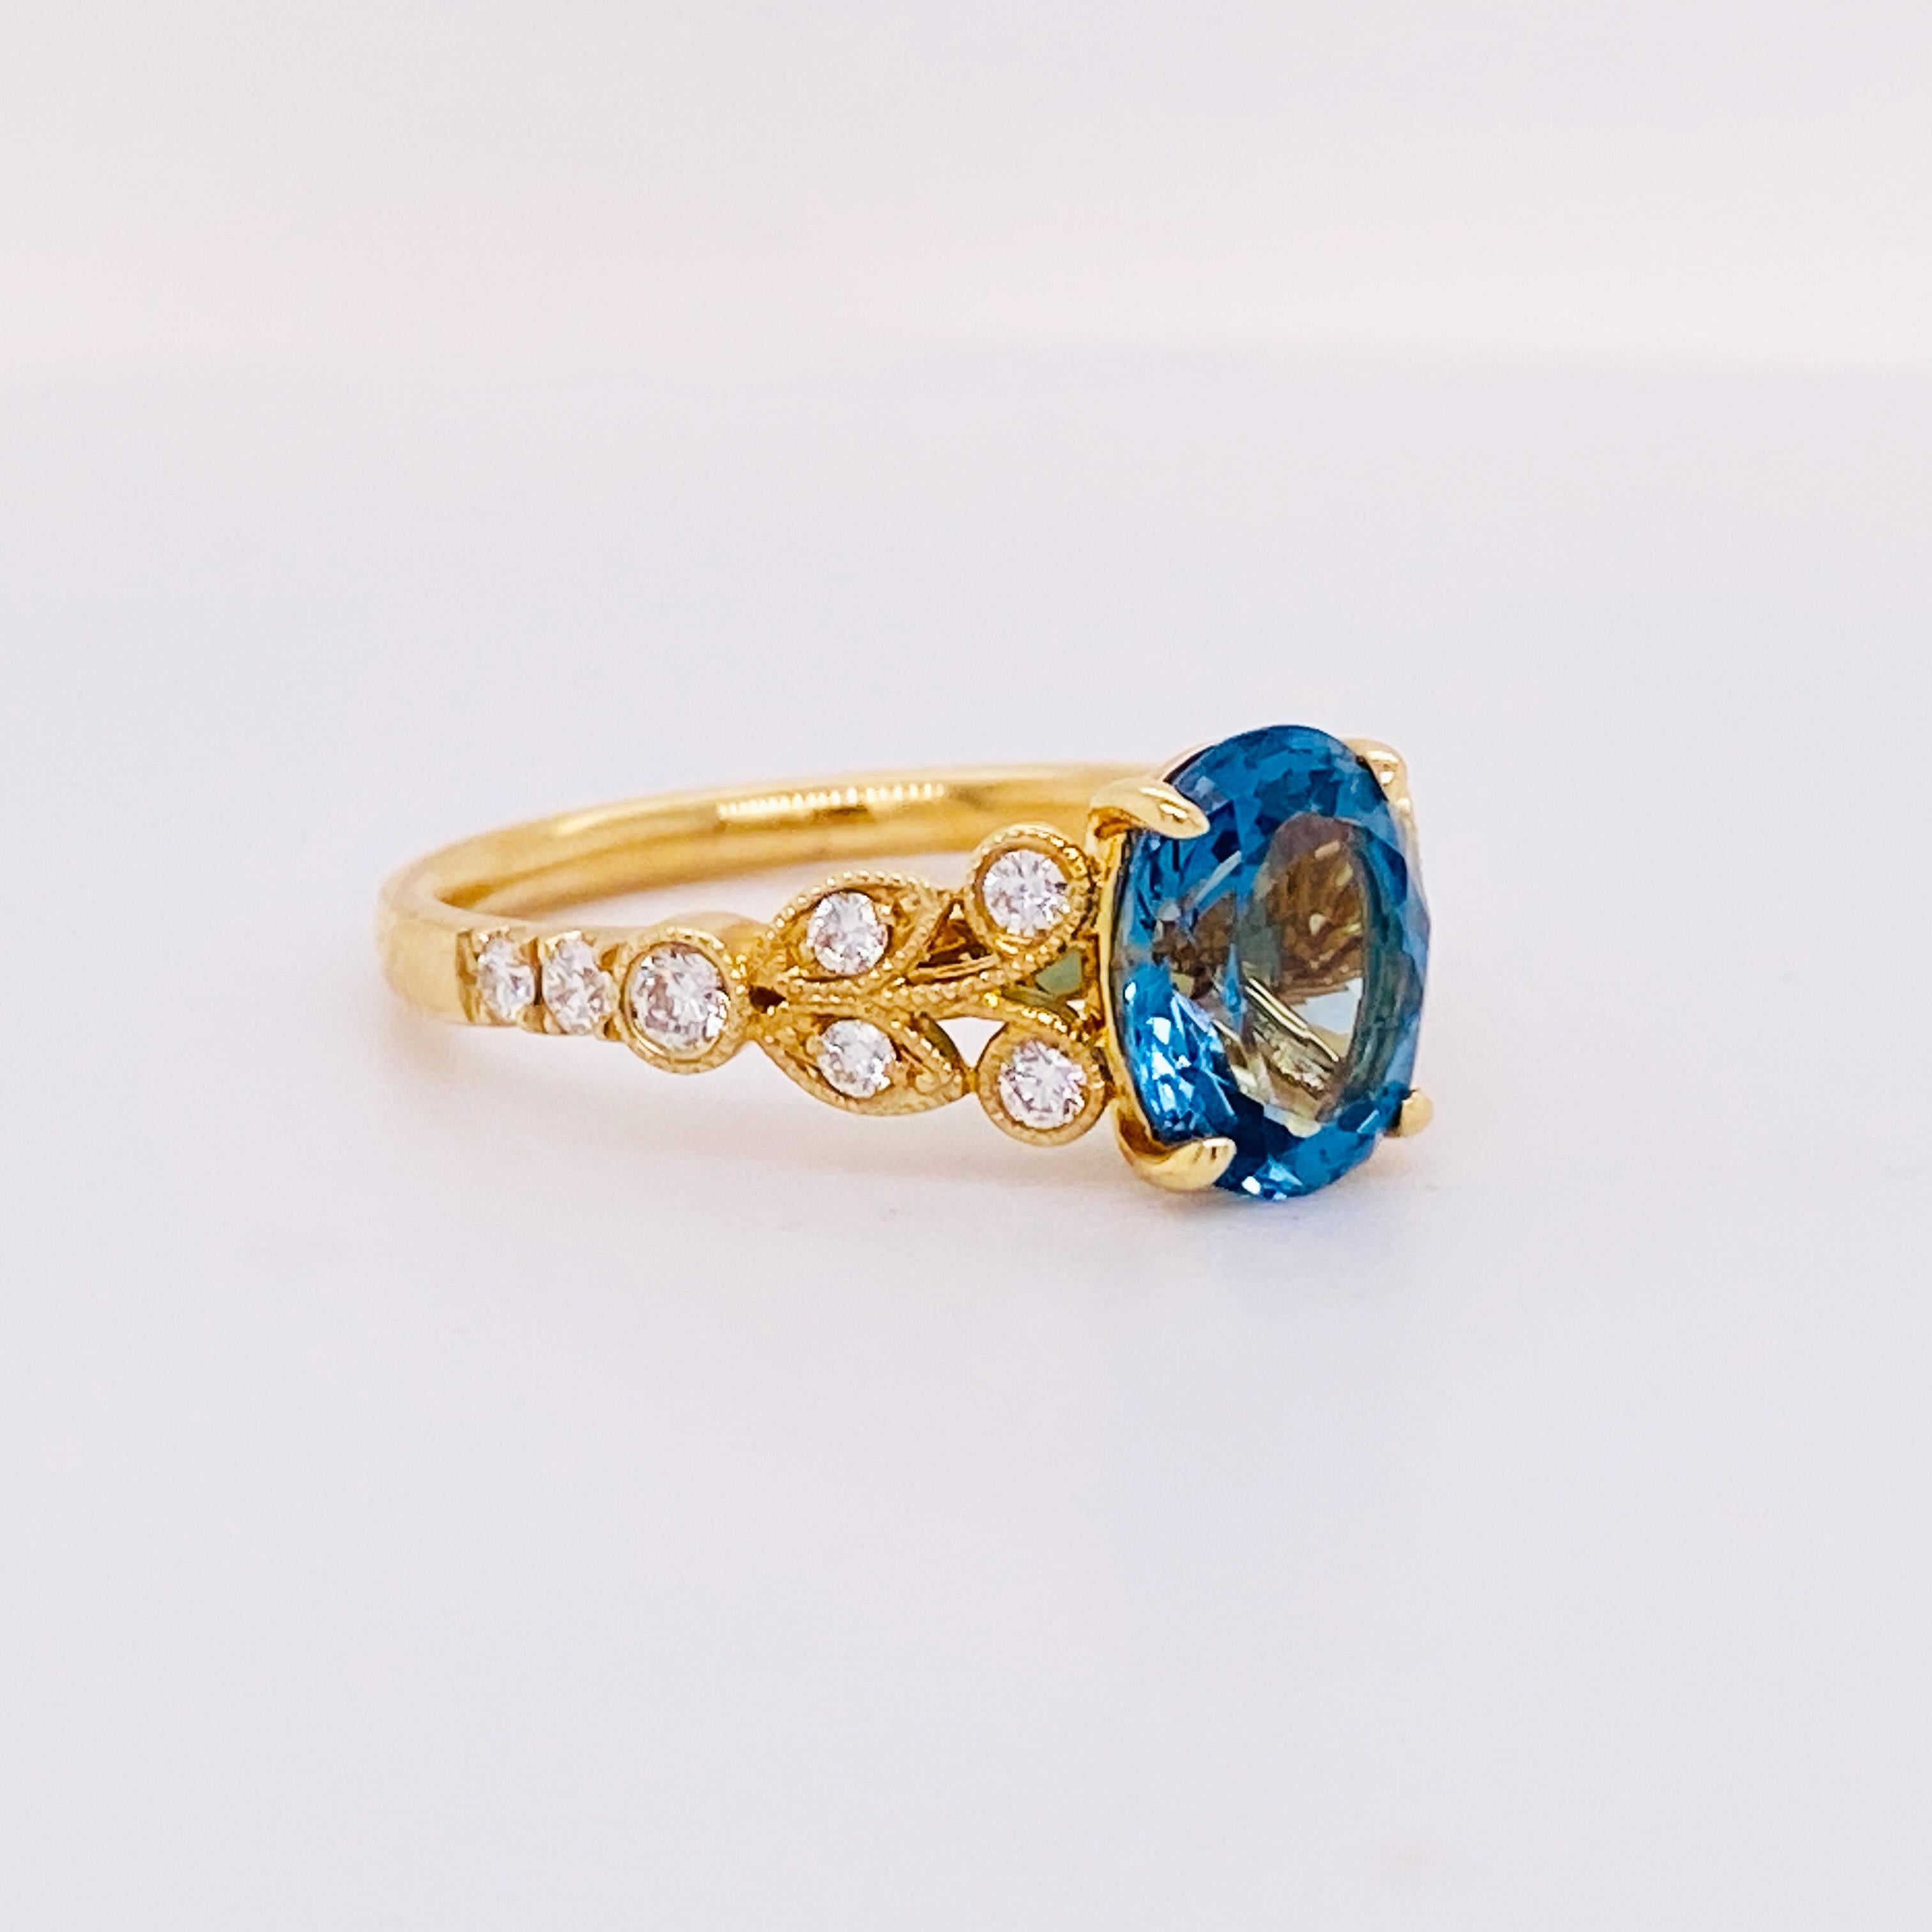 2 Carat Blue Zircon with Diamonds Nature-Inspired Ring in 14K Yellow Gold For Sale 3